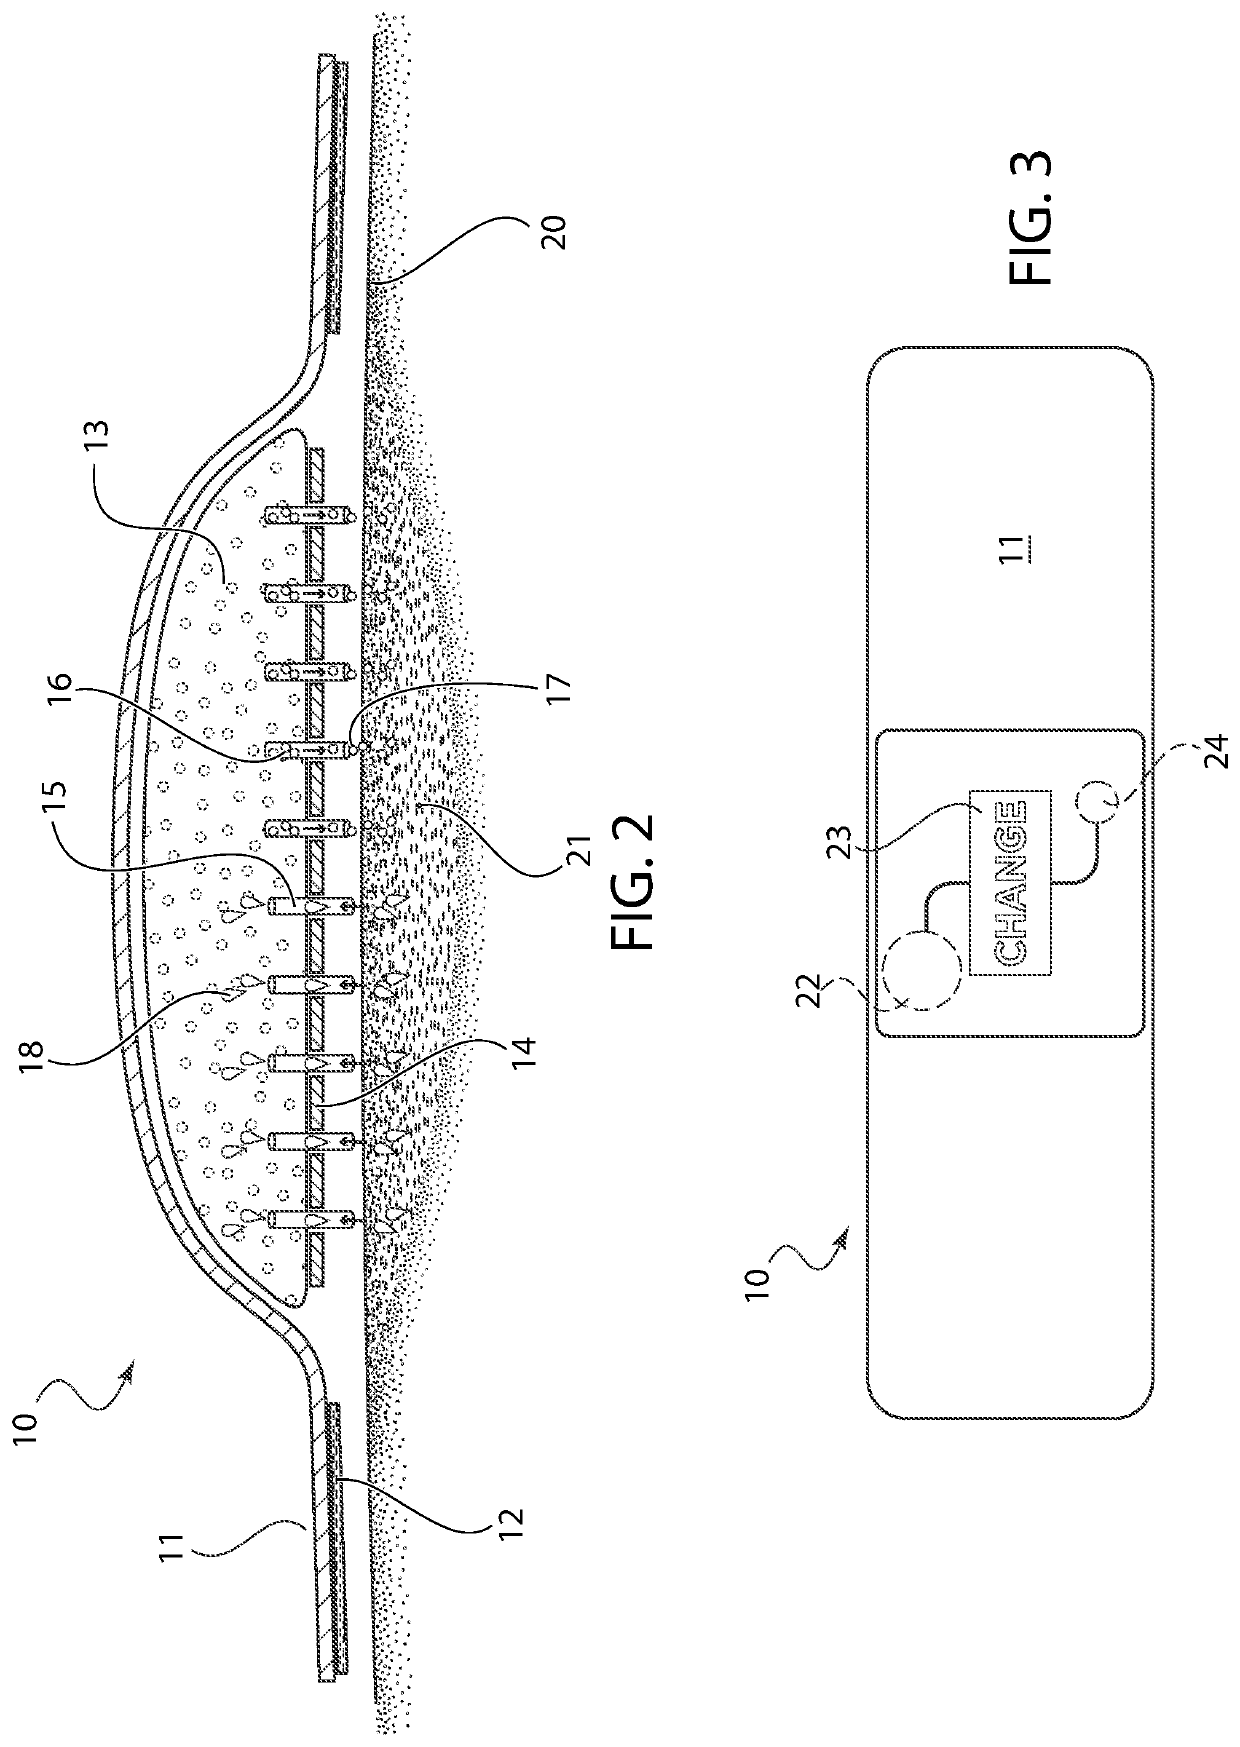 Bandage with microneedles for antimicrobial delivery and fluid absorption from a wound